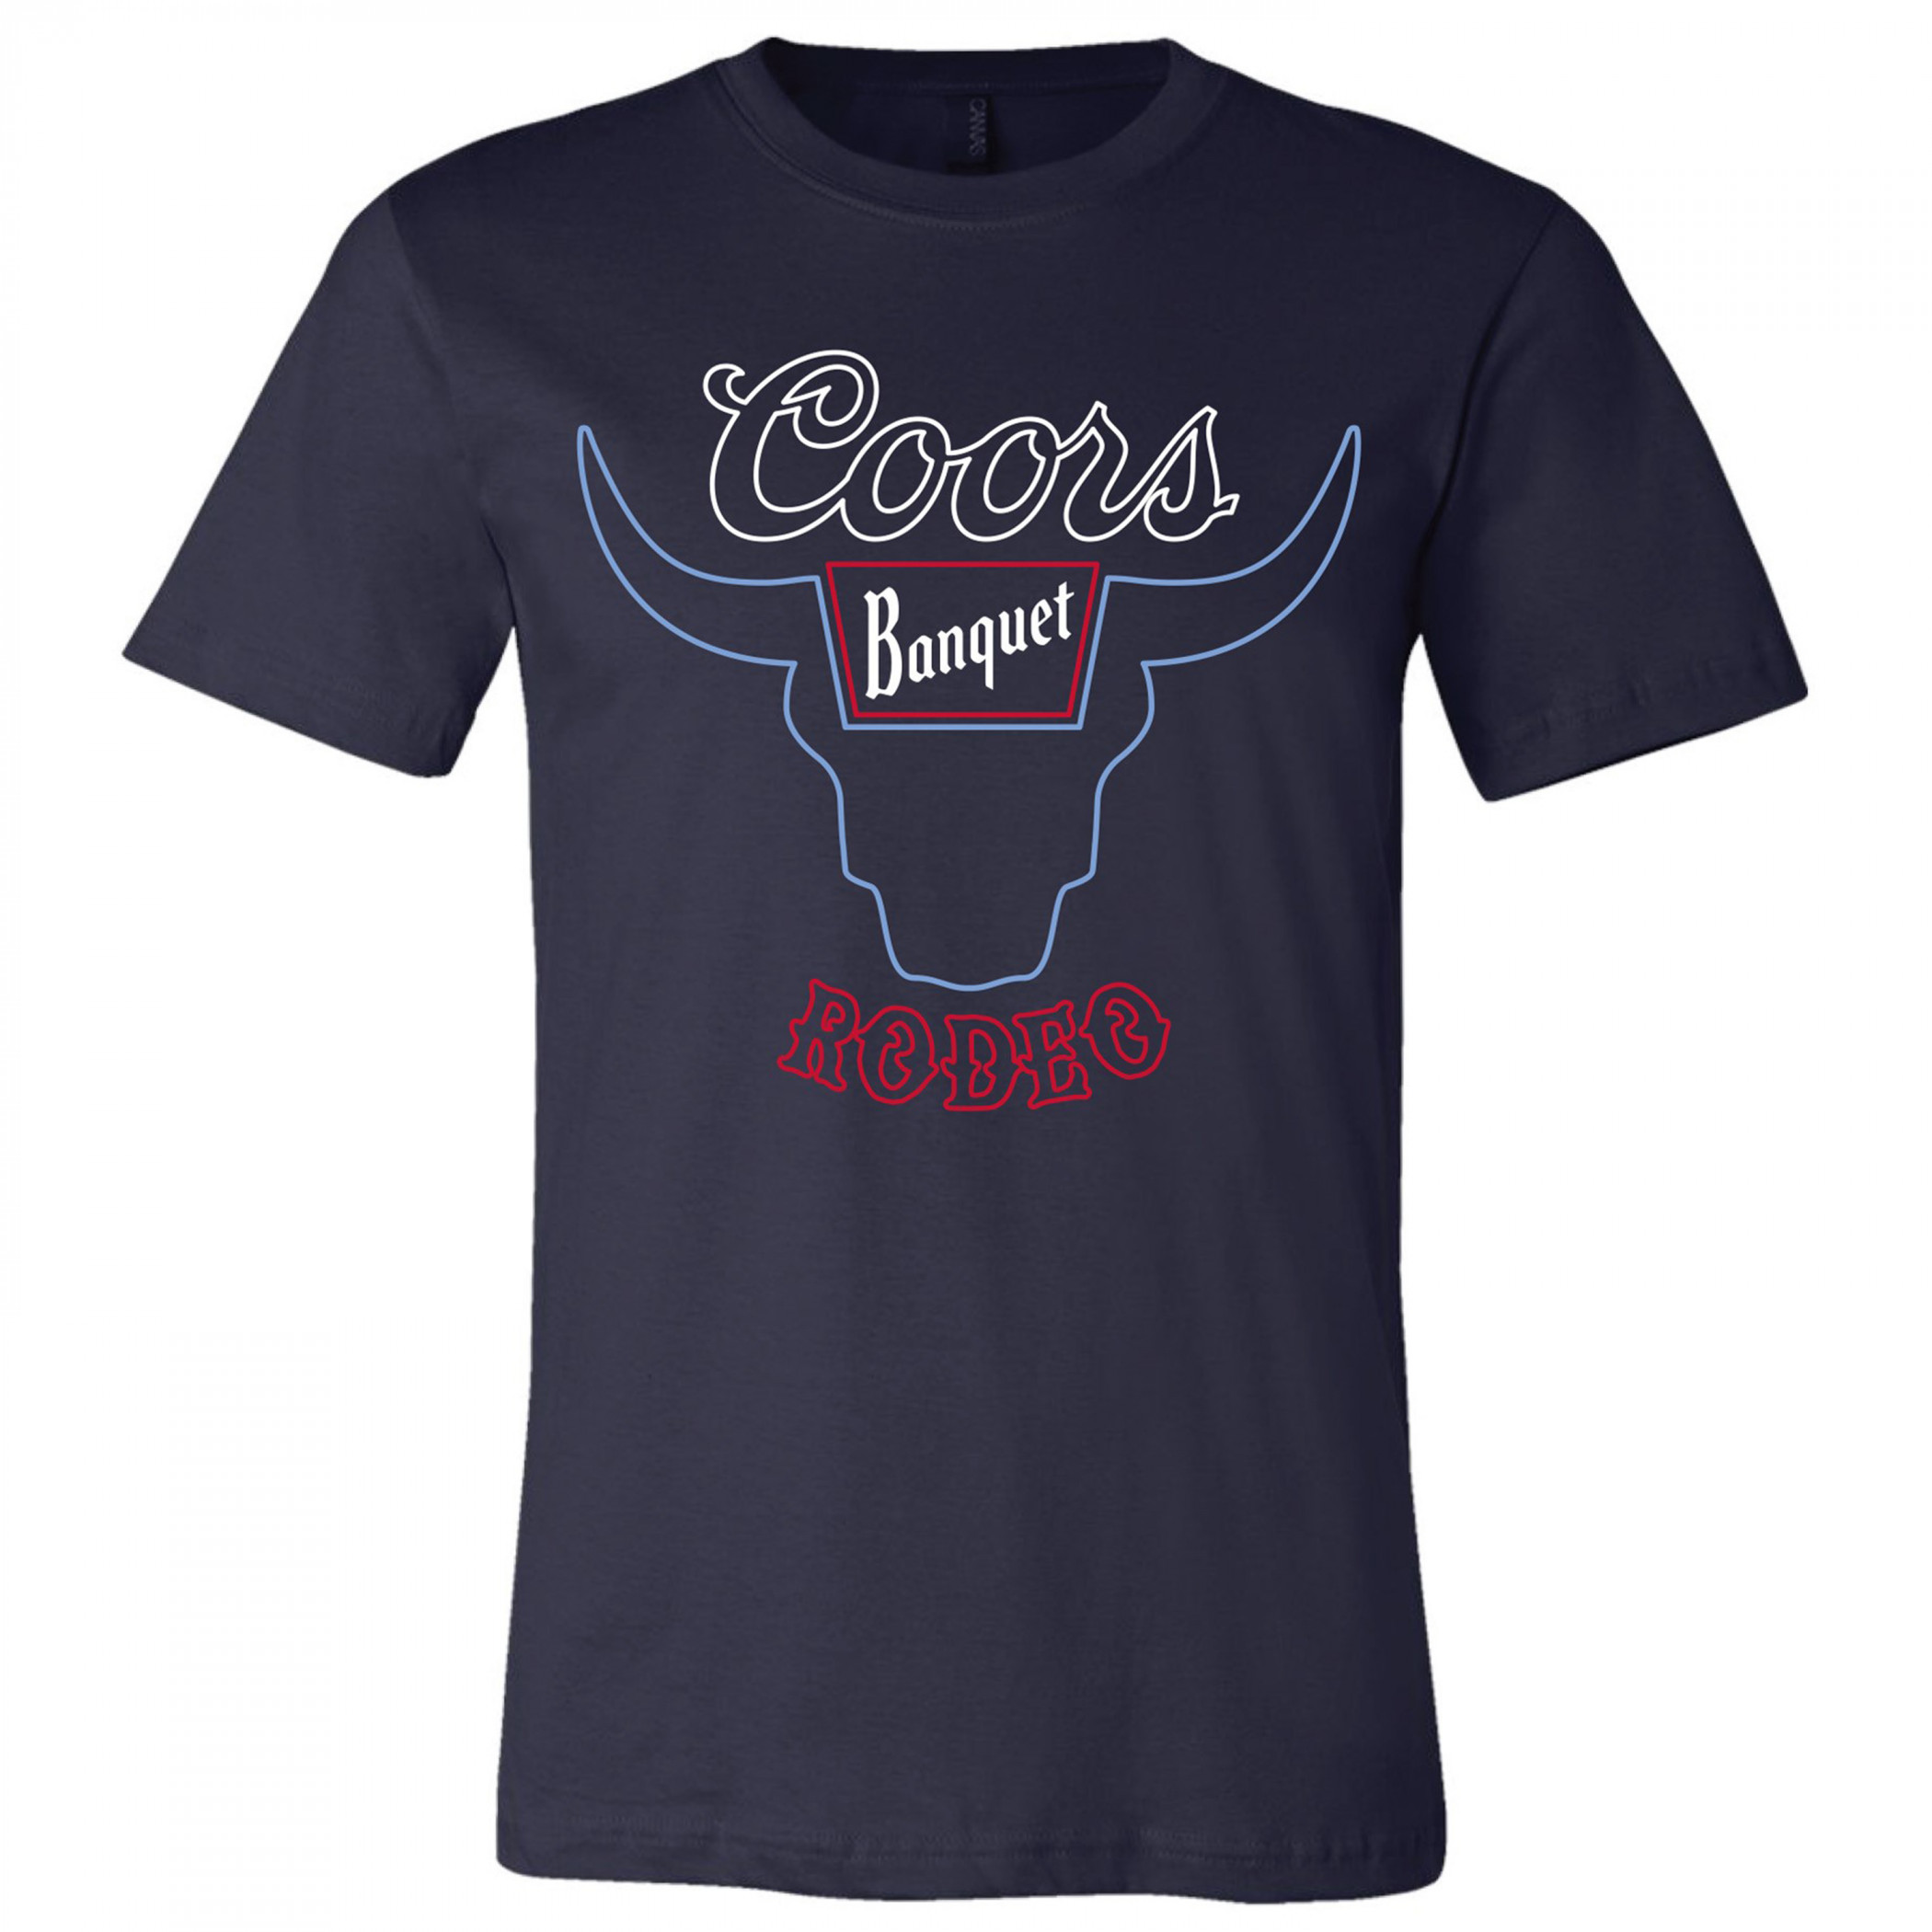 Coors Banquet Beer Rodeo Bull Head Navy Colorway T-Shirt